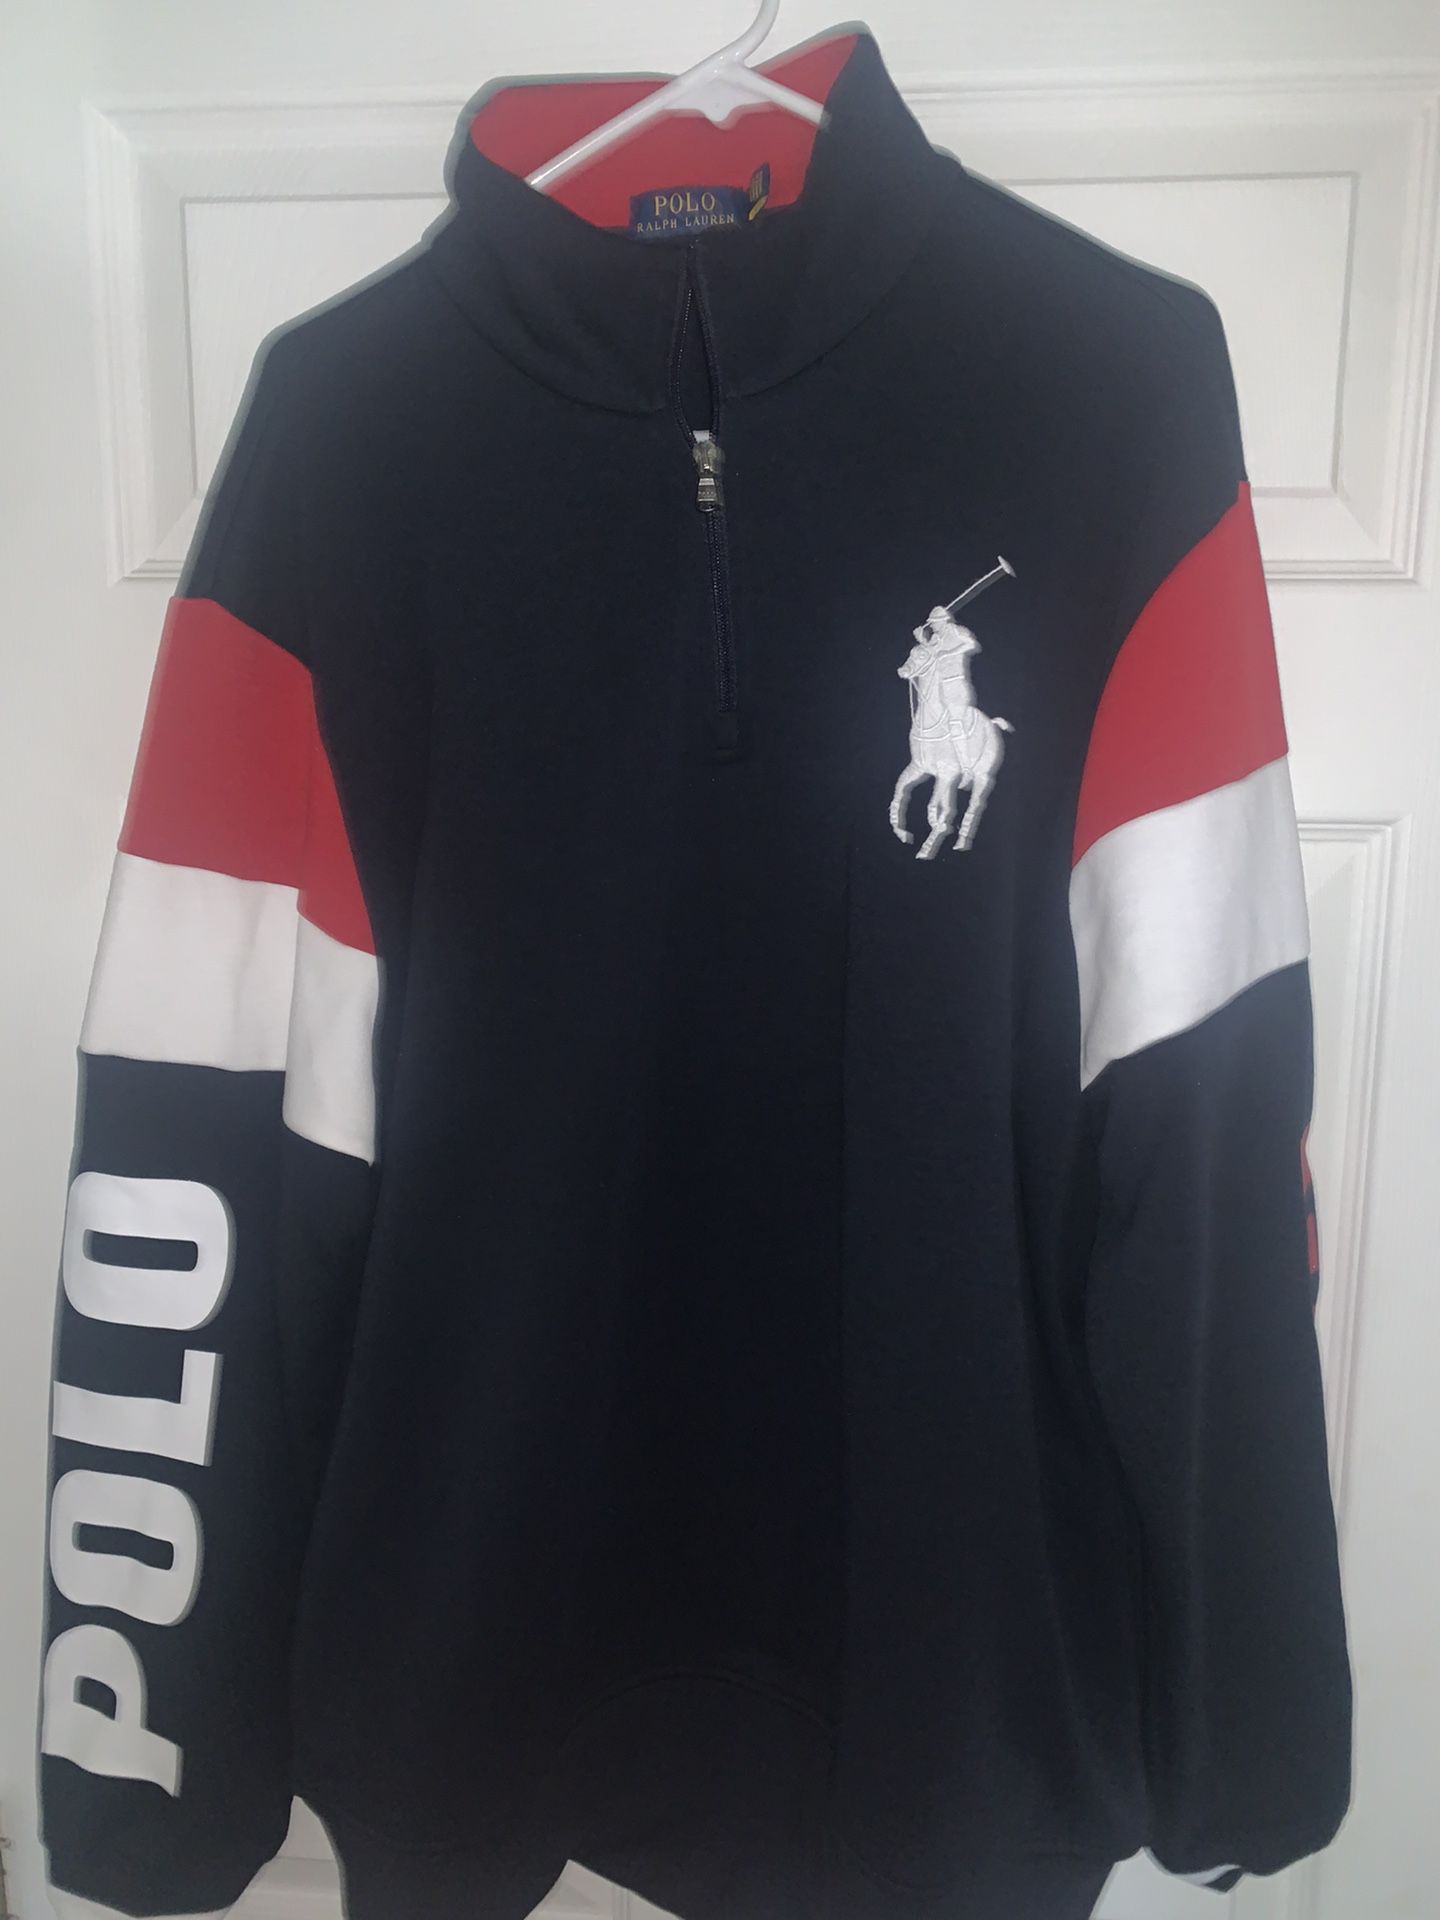 Men’s Polo Ralph Lauren Hoodies Sweaters And Jackets NEW  XL